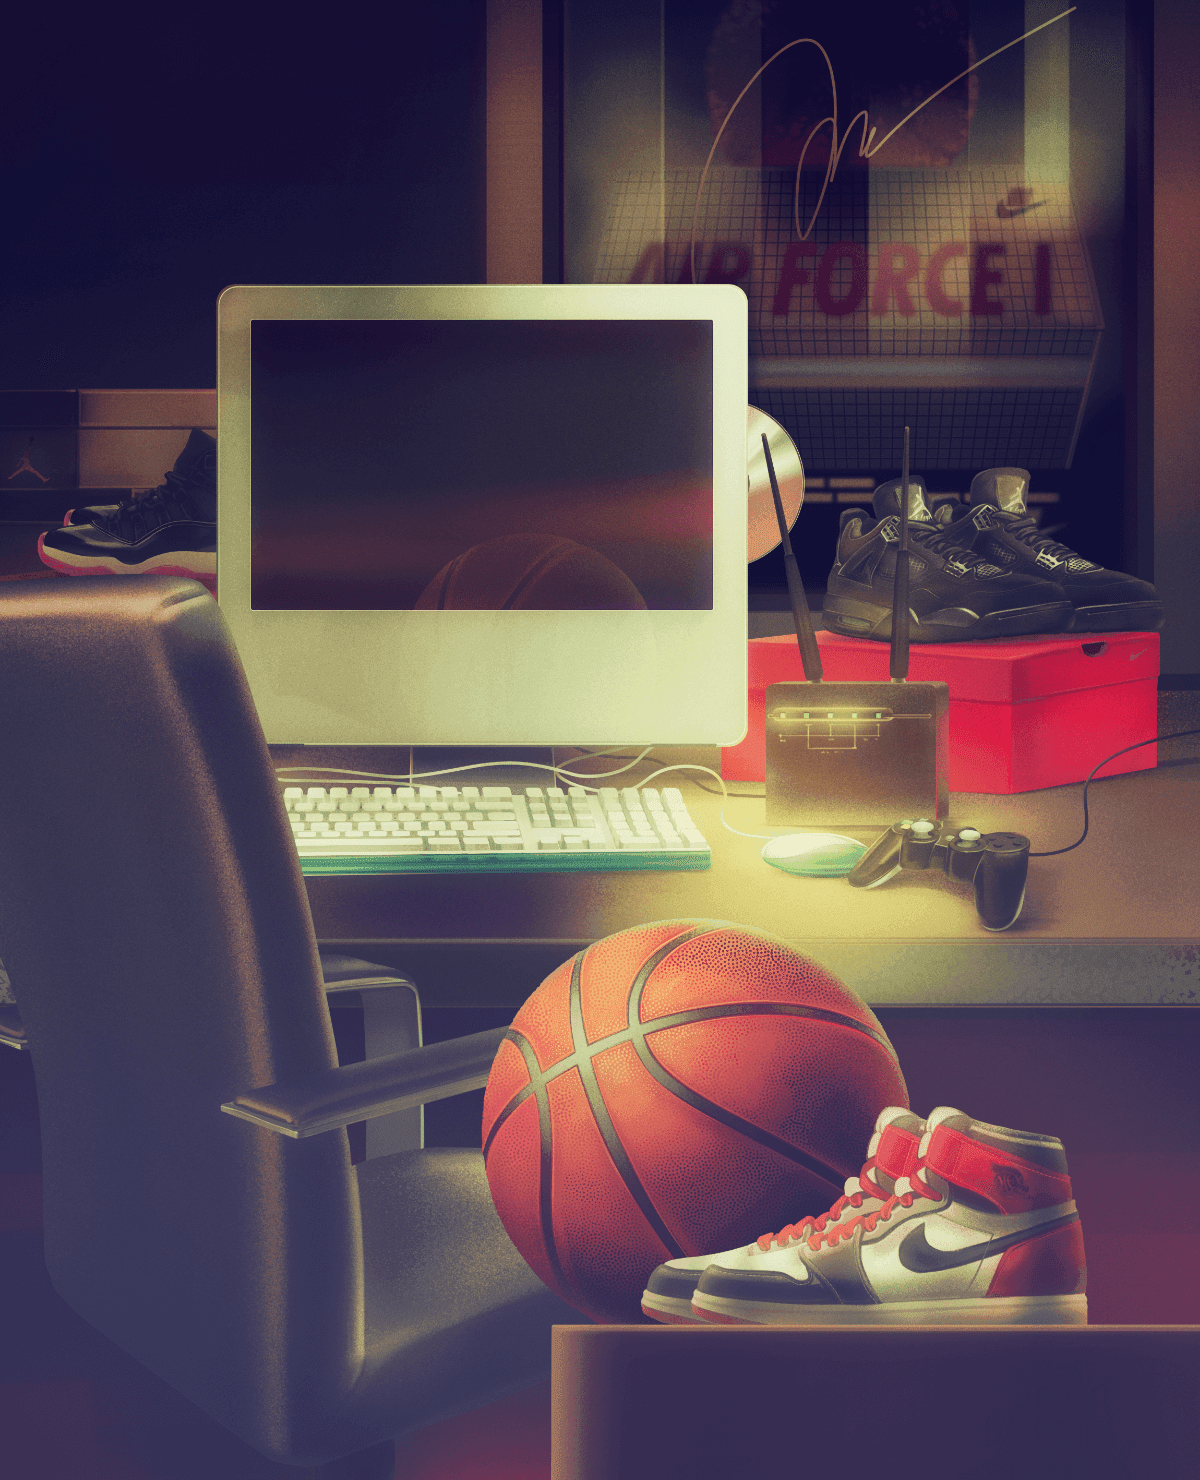 rendered office scene with computer, chair, basketball and Jordan 1 sneakers